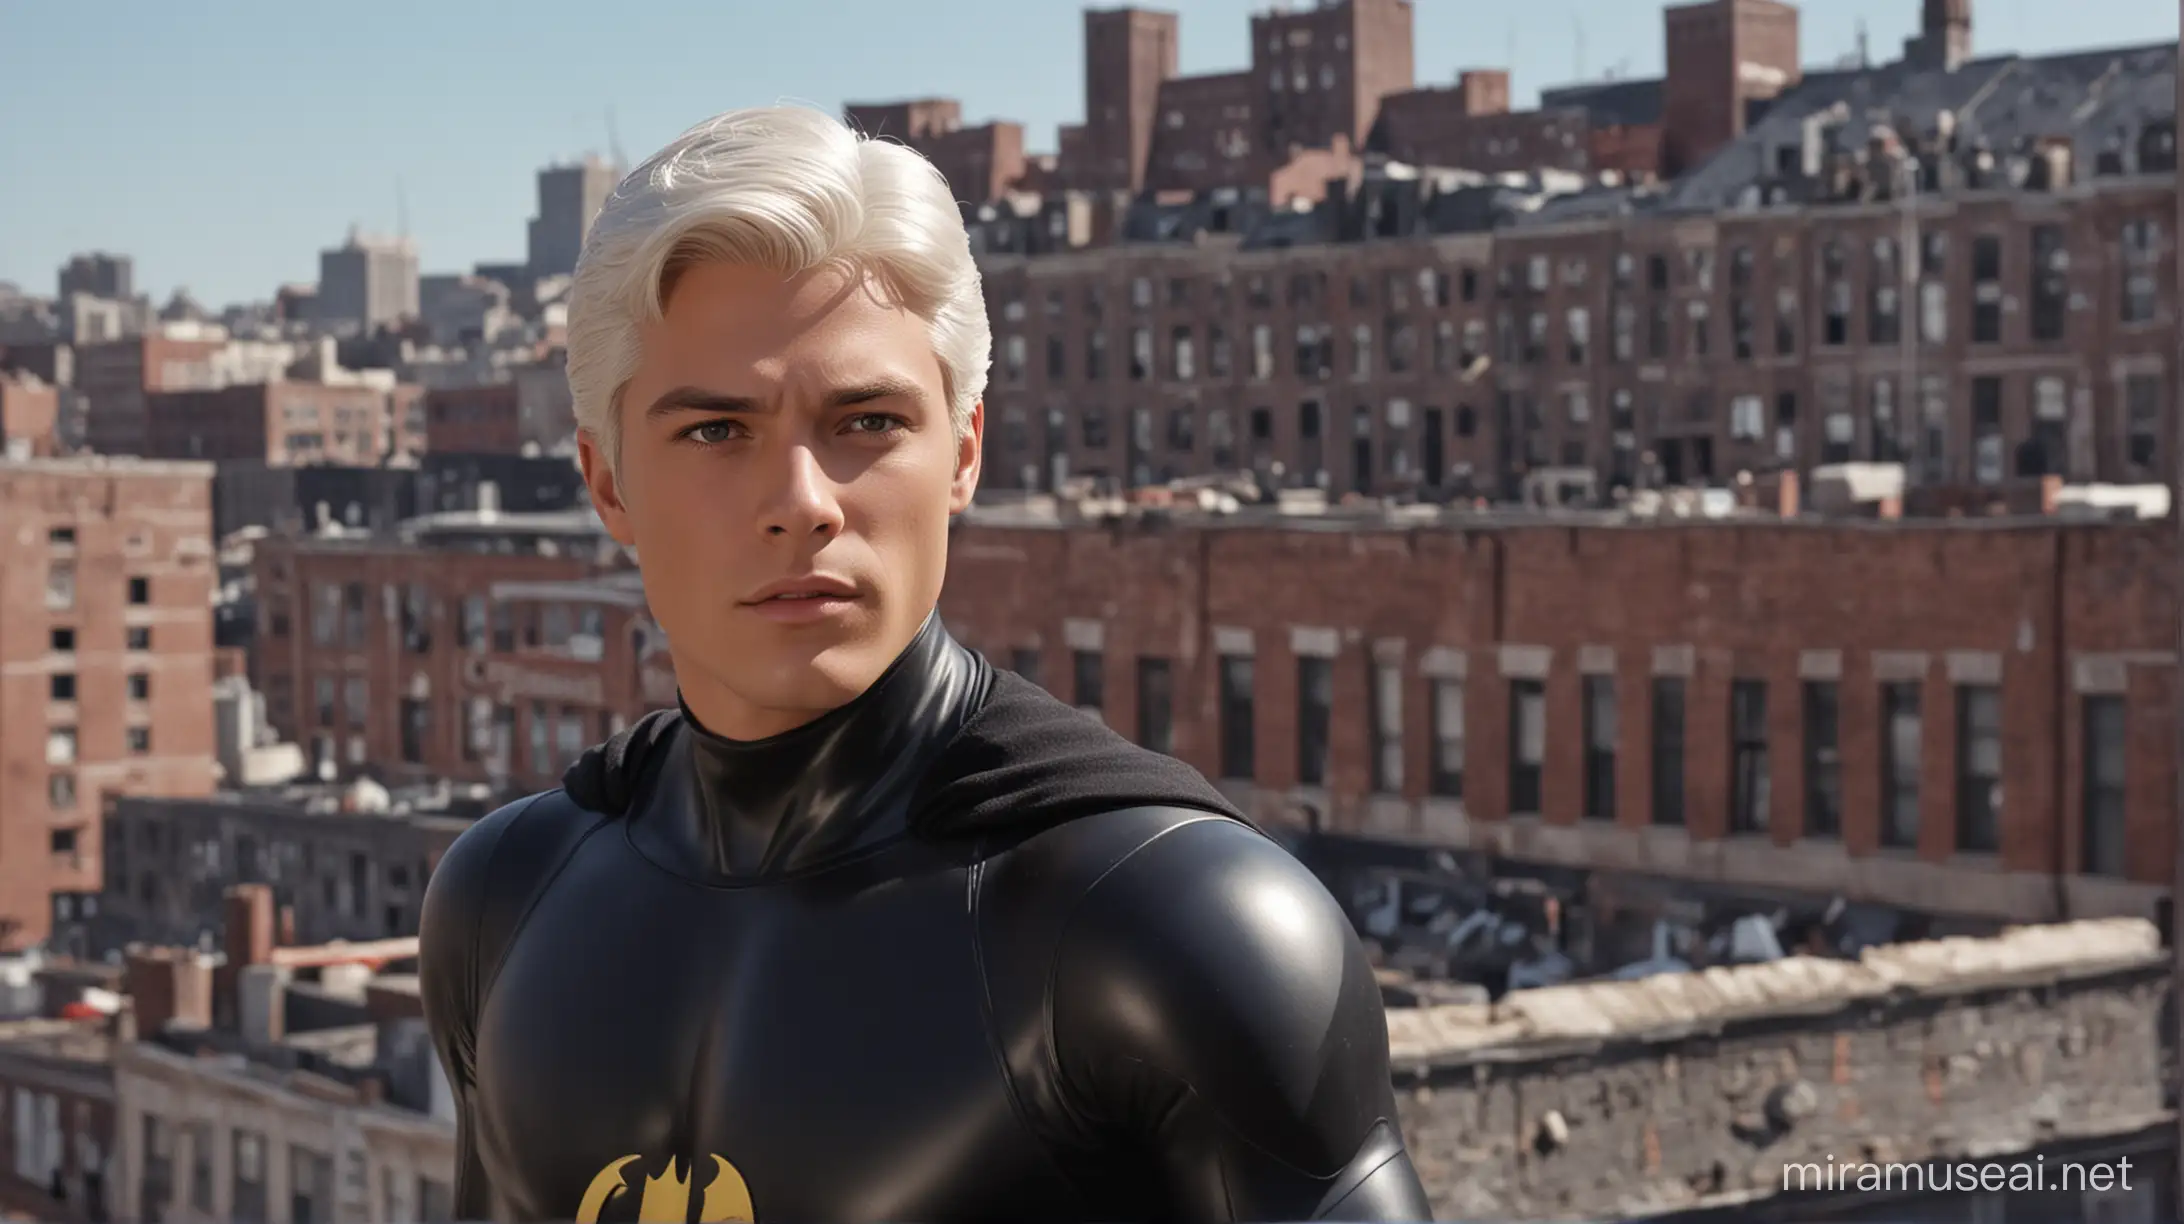 realistic boy,young man 1950,detailed face, white hair ,black suit spandex armor lycra spandex,superhero adamwest,1950,style,background city roof 35mm
